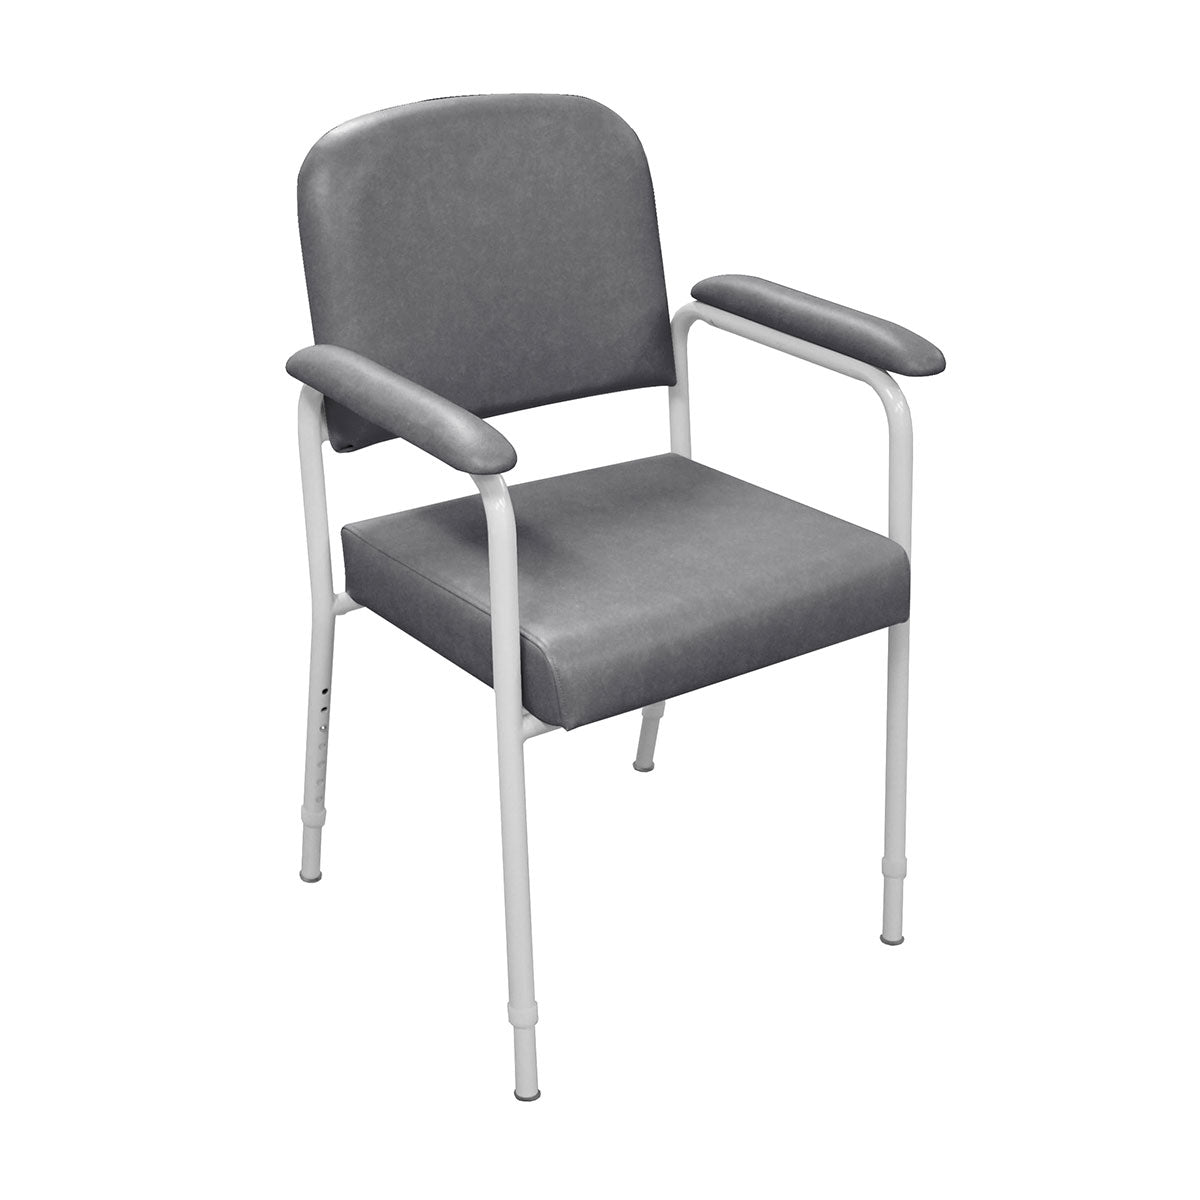 K Care Utility Chair Adjustable